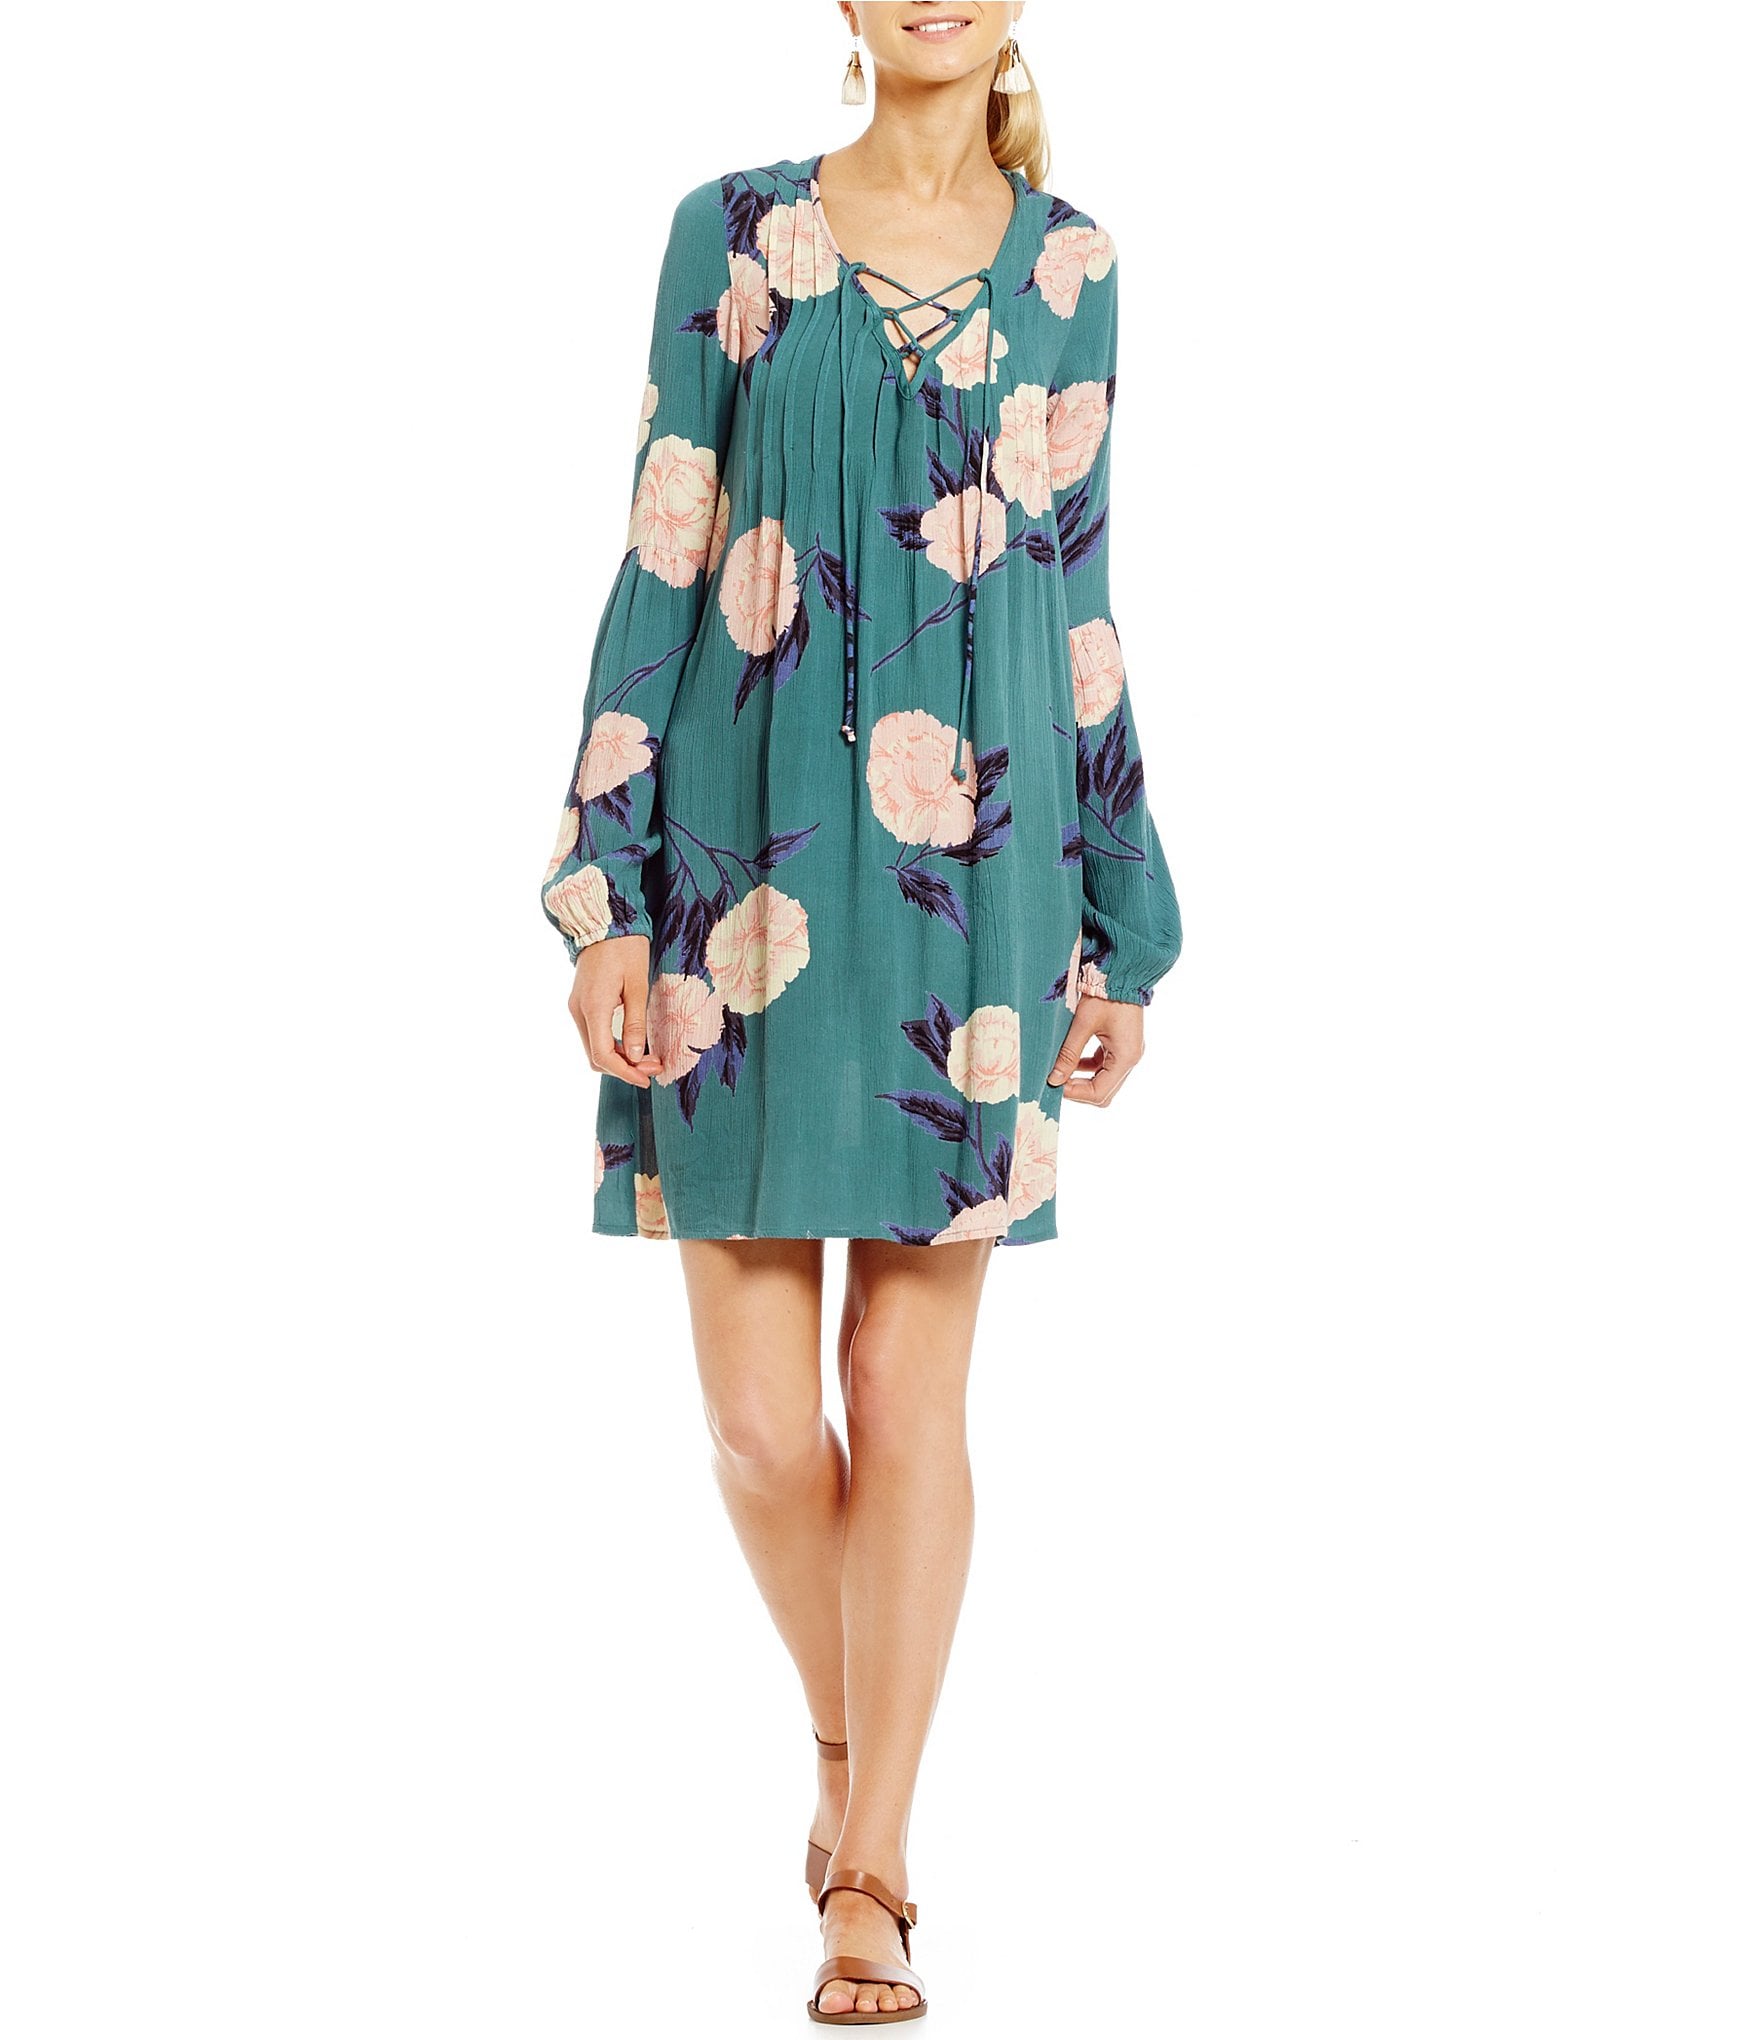 Billabong Just Like You Floral Printed Lace-Up Swing Dress | Dillards